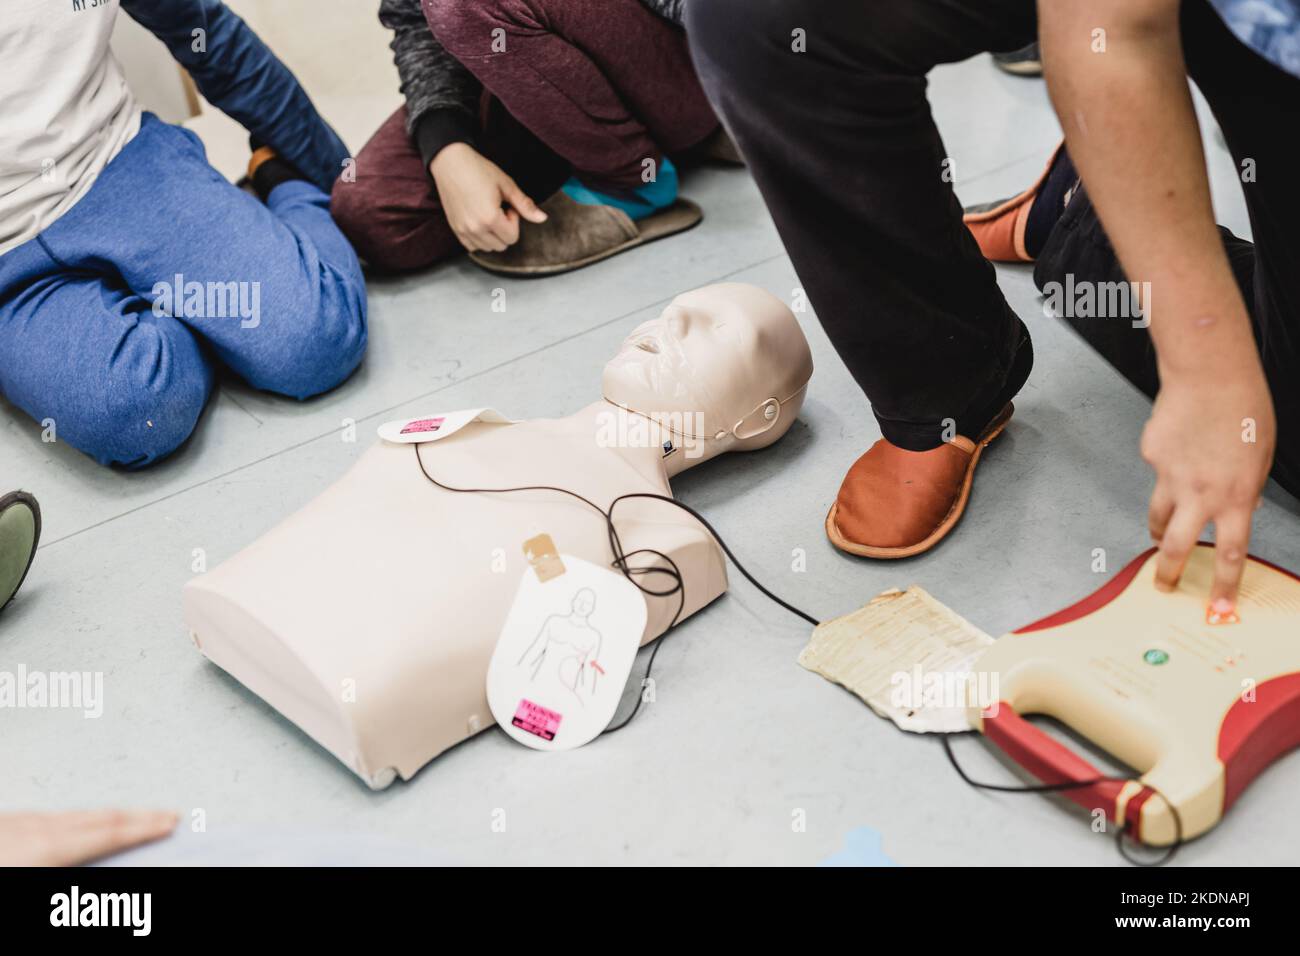 First aid cardiopulmonary resuscitation course using automated external defibrillator device, AED. Stock Photo